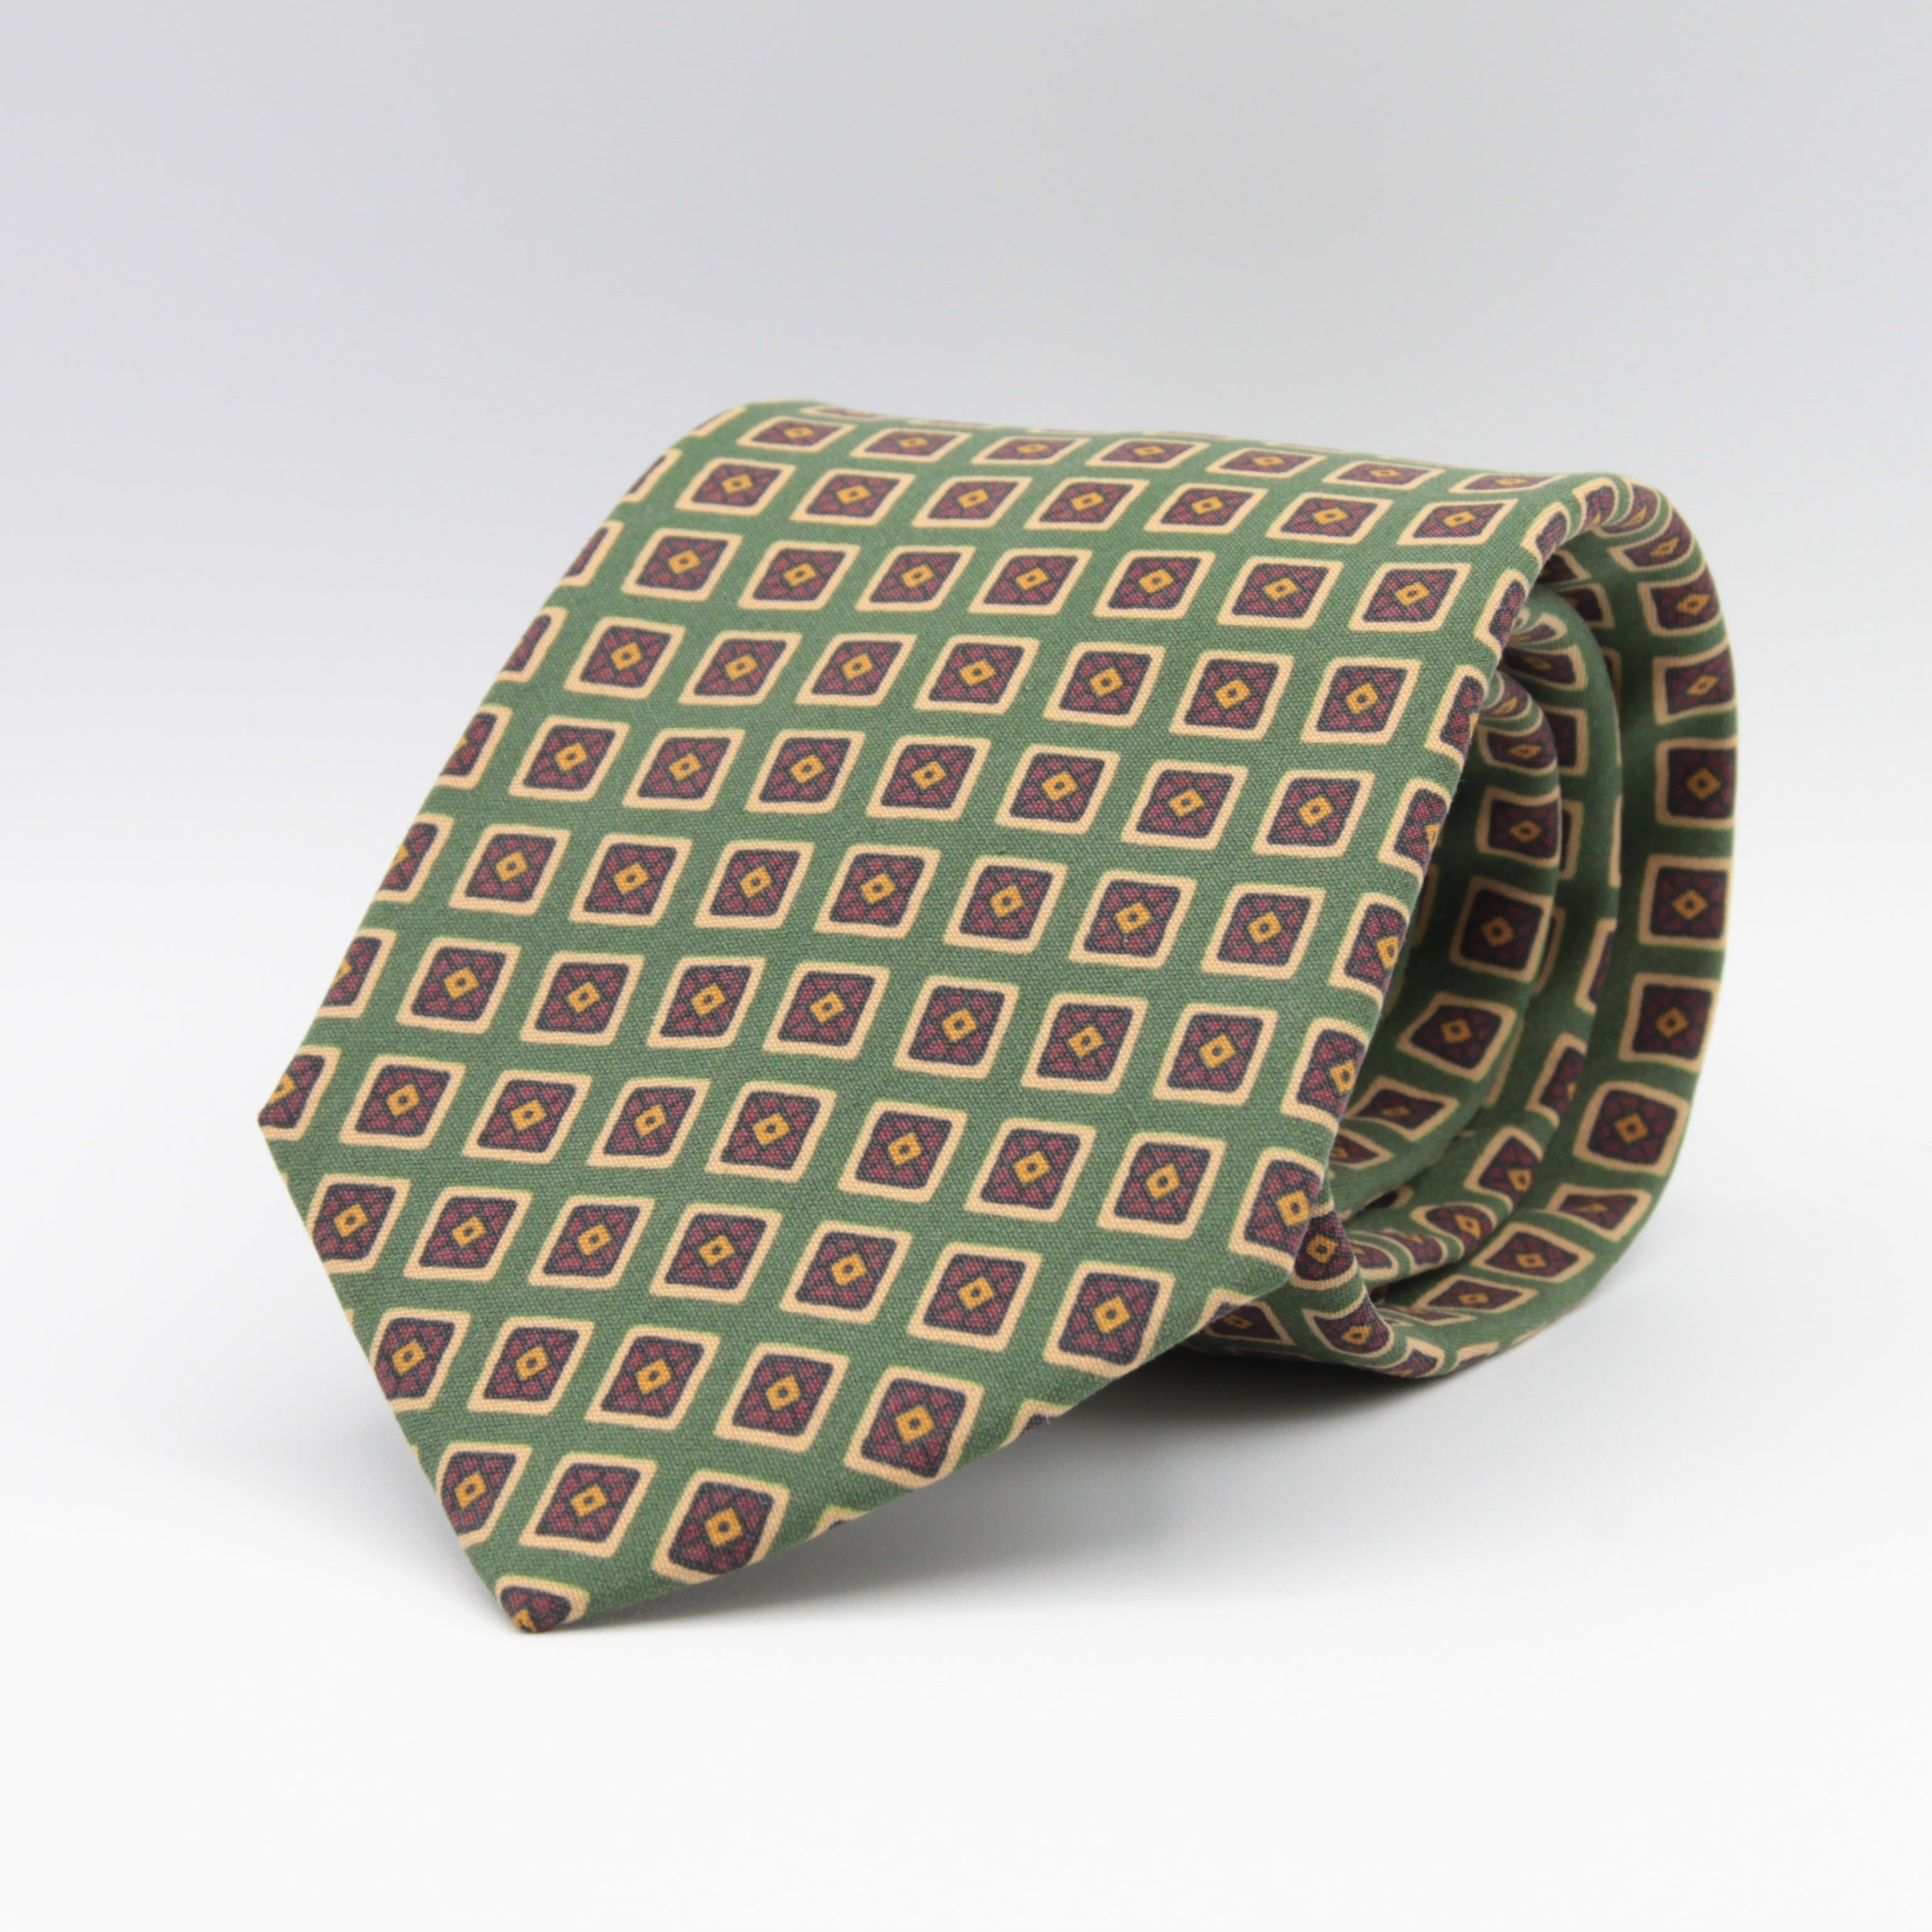 Drake's for Cruciani & Bella 36 oz Tipped 100% Printed Madder Silk Green, Rust and Yellow Motif Tie Handmade in London. England 9 cm x 150 cm #2399